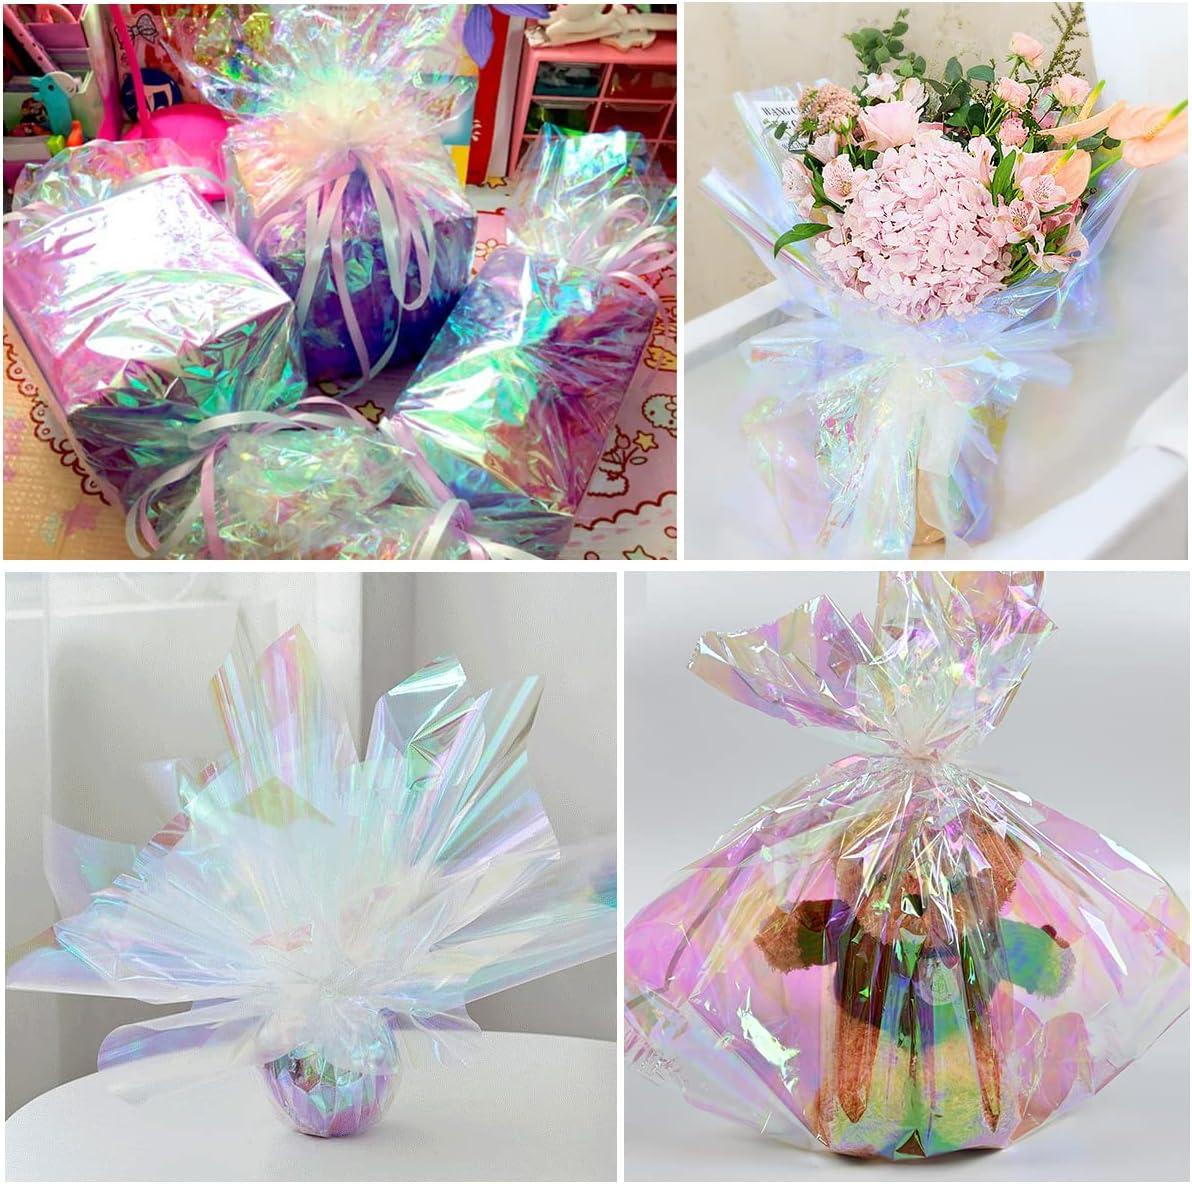 JOYIT Iridescent Cellophane Roll, Iridescent Wrapping Paper Cellophane Wrap for Gift Baskets Iridescent Film for DIY Wrapping, Gift Baskets, Treats